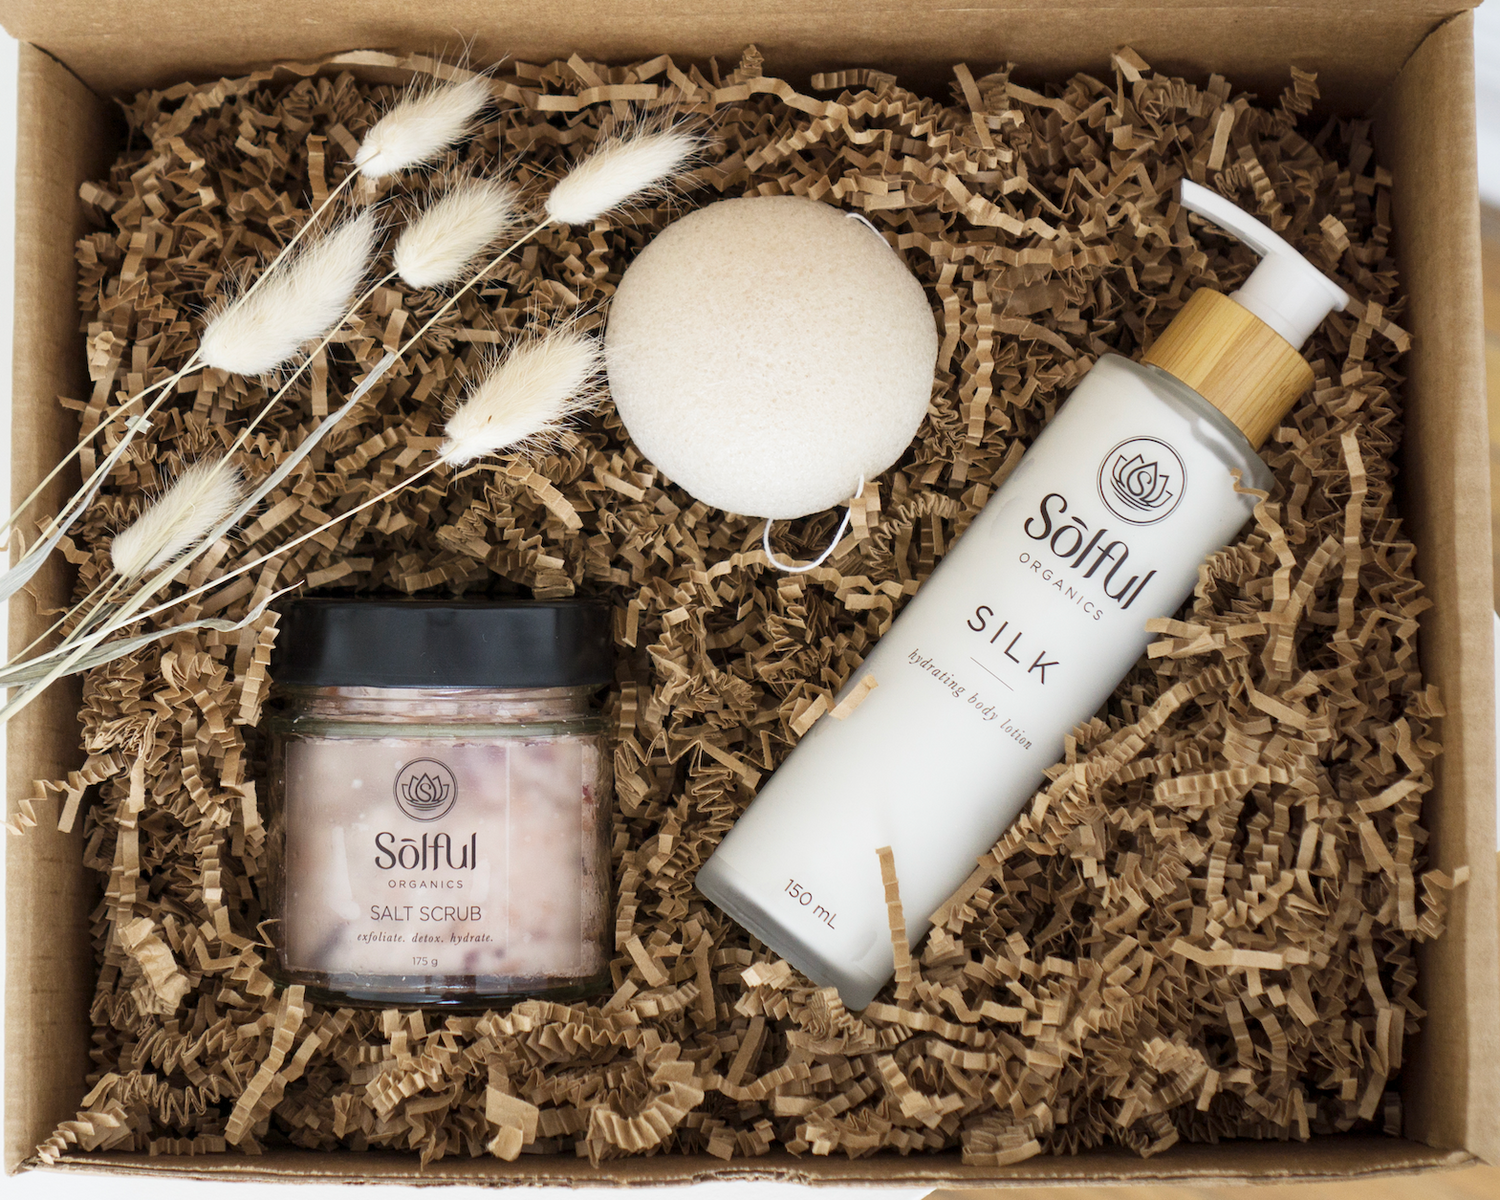 Gift set collection from Solful Organics.